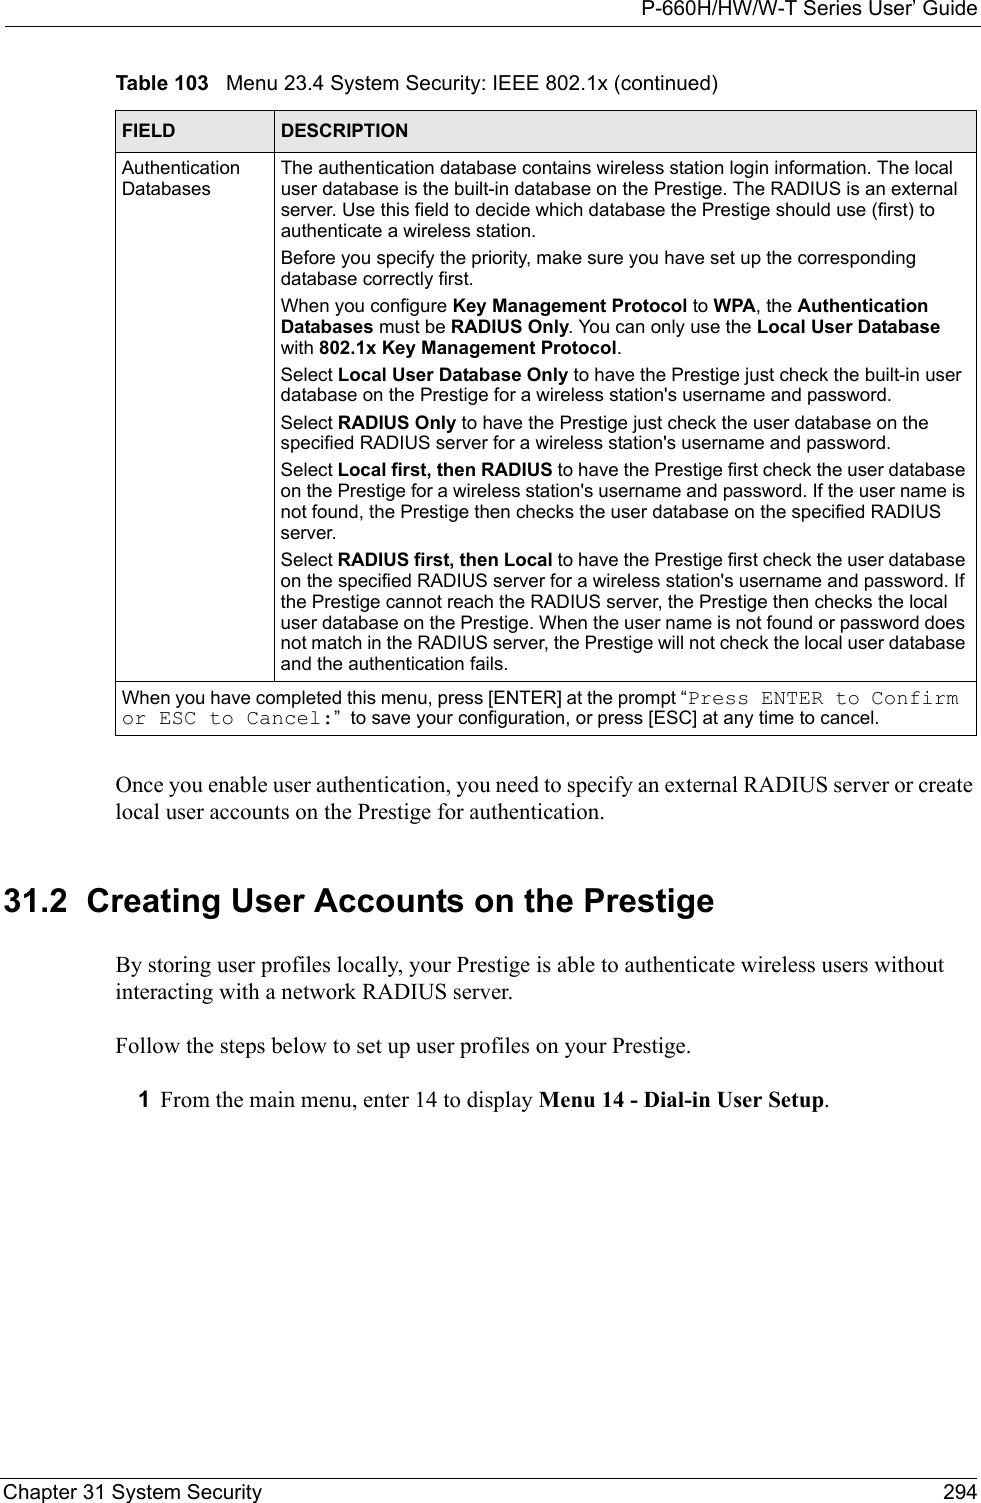 P-660H/HW/W-T Series User’ GuideChapter 31 System Security 294Once you enable user authentication, you need to specify an external RADIUS server or create local user accounts on the Prestige for authentication. 31.2  Creating User Accounts on the Prestige By storing user profiles locally, your Prestige is able to authenticate wireless users without interacting with a network RADIUS server. Follow the steps below to set up user profiles on your Prestige.1From the main menu, enter 14 to display Menu 14 - Dial-in User Setup.Authentication DatabasesThe authentication database contains wireless station login information. The local user database is the built-in database on the Prestige. The RADIUS is an external server. Use this field to decide which database the Prestige should use (first) to authenticate a wireless station.Before you specify the priority, make sure you have set up the corresponding database correctly first. When you configure Key Management Protocol to WPA, the Authentication Databases must be RADIUS Only. You can only use the Local User Database with 802.1x Key Management Protocol.Select Local User Database Only to have the Prestige just check the built-in user database on the Prestige for a wireless station&apos;s username and password. Select RADIUS Only to have the Prestige just check the user database on the specified RADIUS server for a wireless station&apos;s username and password. Select Local first, then RADIUS to have the Prestige first check the user database on the Prestige for a wireless station&apos;s username and password. If the user name is not found, the Prestige then checks the user database on the specified RADIUS server.Select RADIUS first, then Local to have the Prestige first check the user database on the specified RADIUS server for a wireless station&apos;s username and password. If the Prestige cannot reach the RADIUS server, the Prestige then checks the local user database on the Prestige. When the user name is not found or password does not match in the RADIUS server, the Prestige will not check the local user database and the authentication fails.When you have completed this menu, press [ENTER] at the prompt “Press ENTER to Confirm or ESC to Cancel:”  to save your configuration, or press [ESC] at any time to cancel.Table 103   Menu 23.4 System Security: IEEE 802.1x (continued)FIELD DESCRIPTION